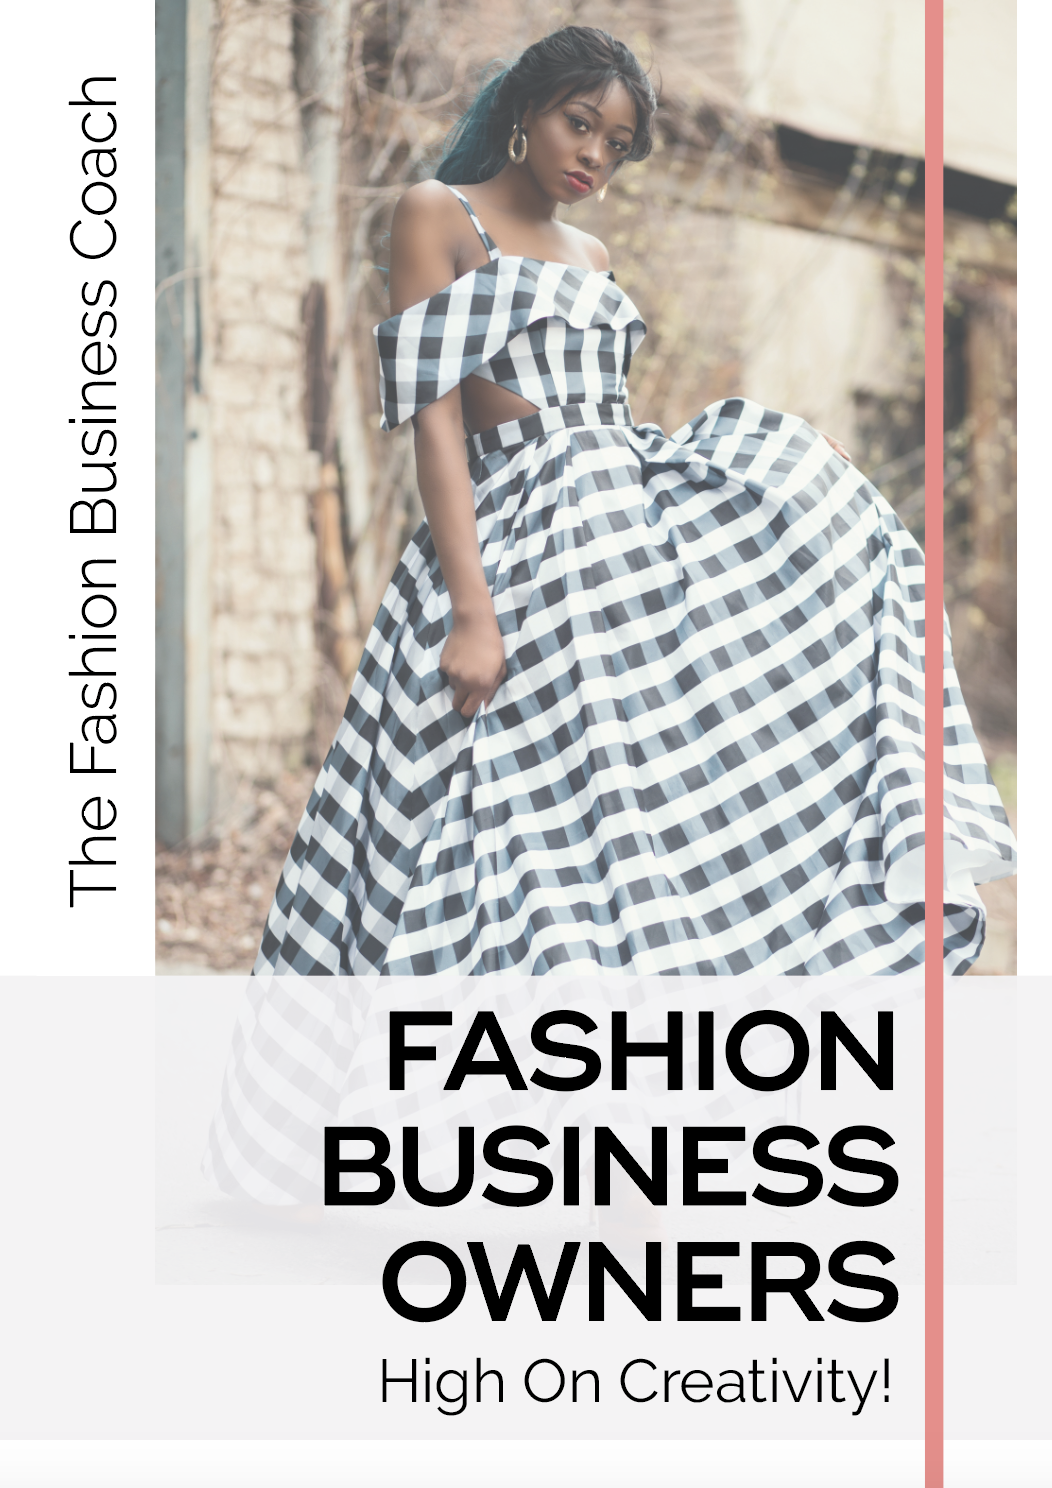 Fashion Business Owners - High on Creativity! 1.png